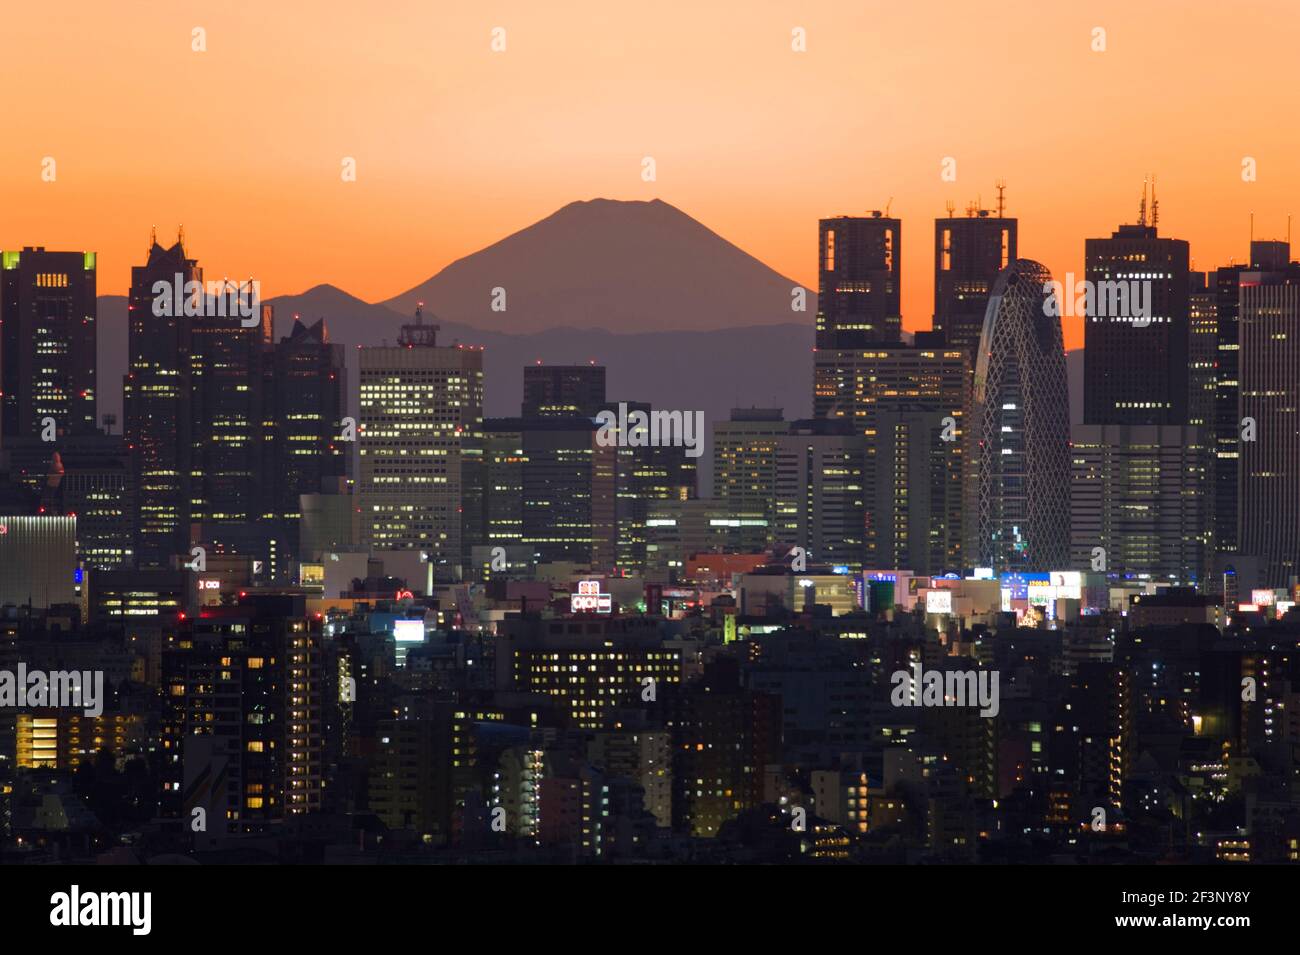 A telephoto view in clear winter twilight captures Mt. Fuji's distinctive peak rising dramatically beyond the skyscrapers (including Tokyo City Hall) Stock Photo